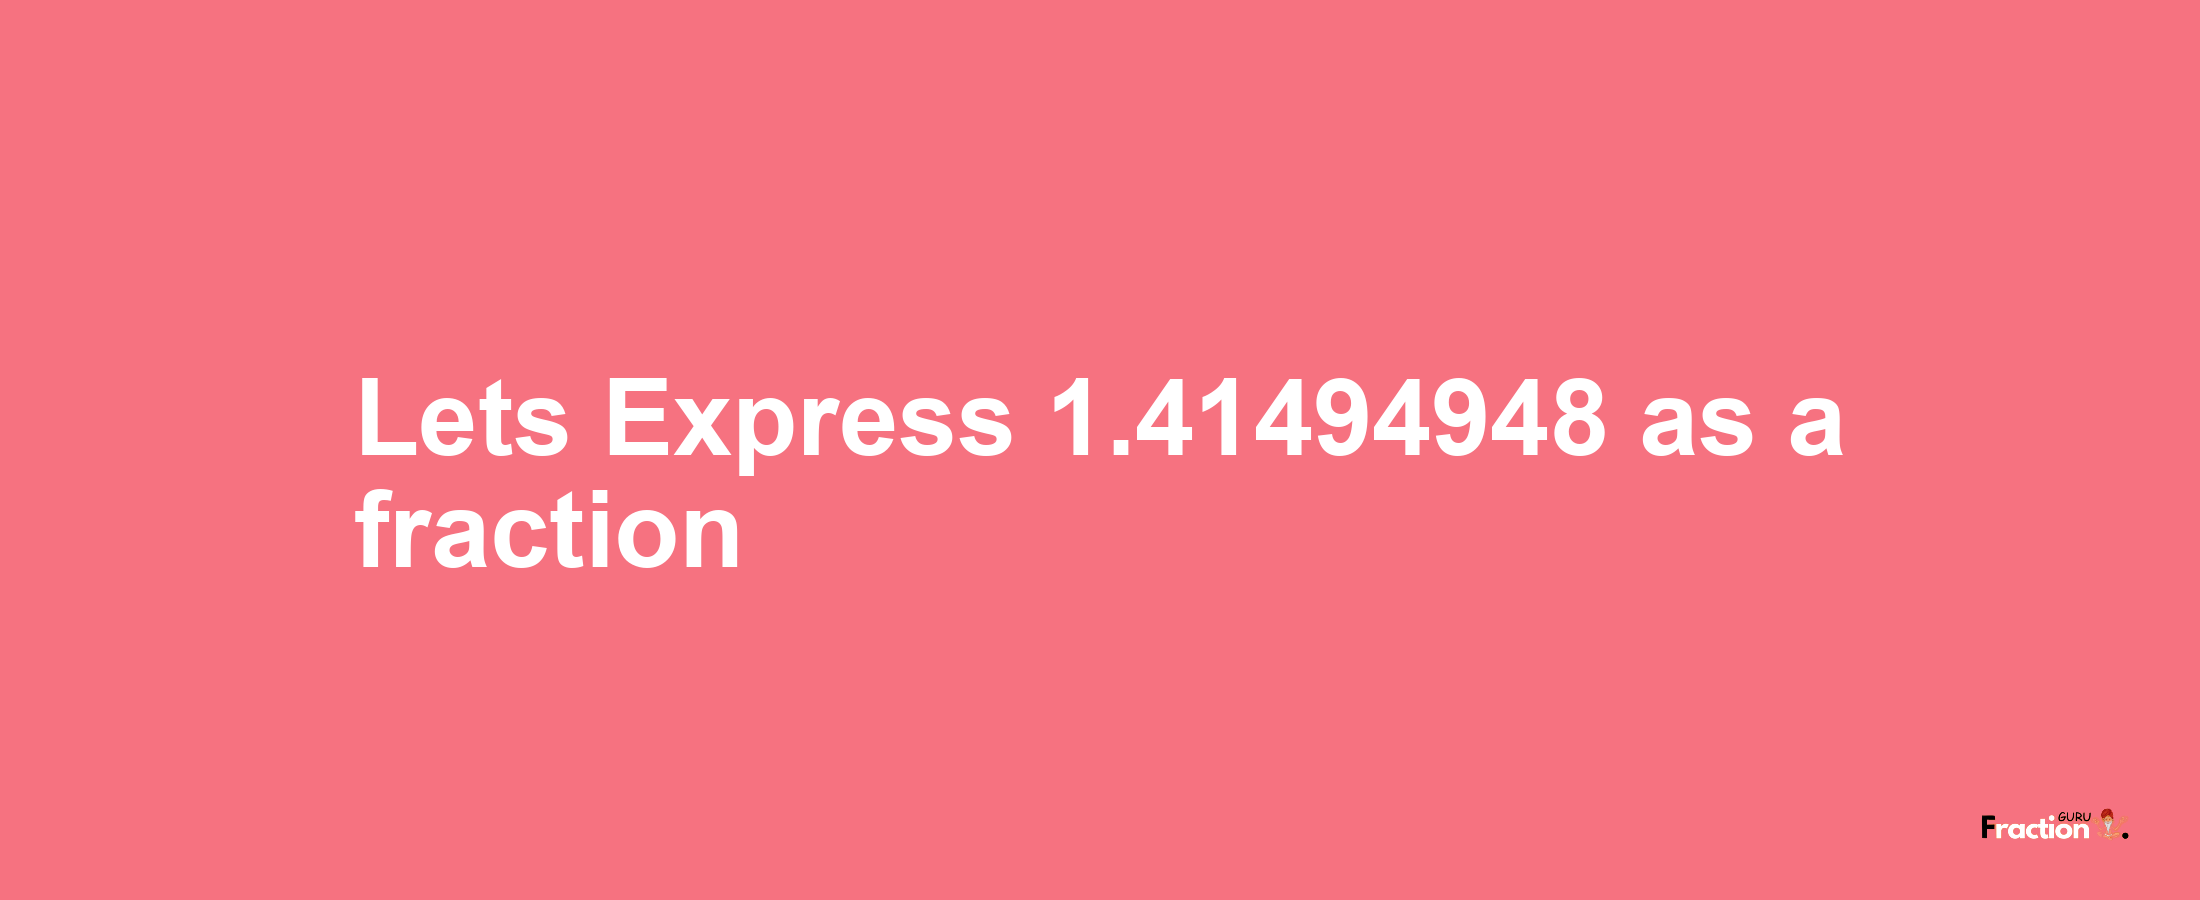 Lets Express 1.41494948 as afraction